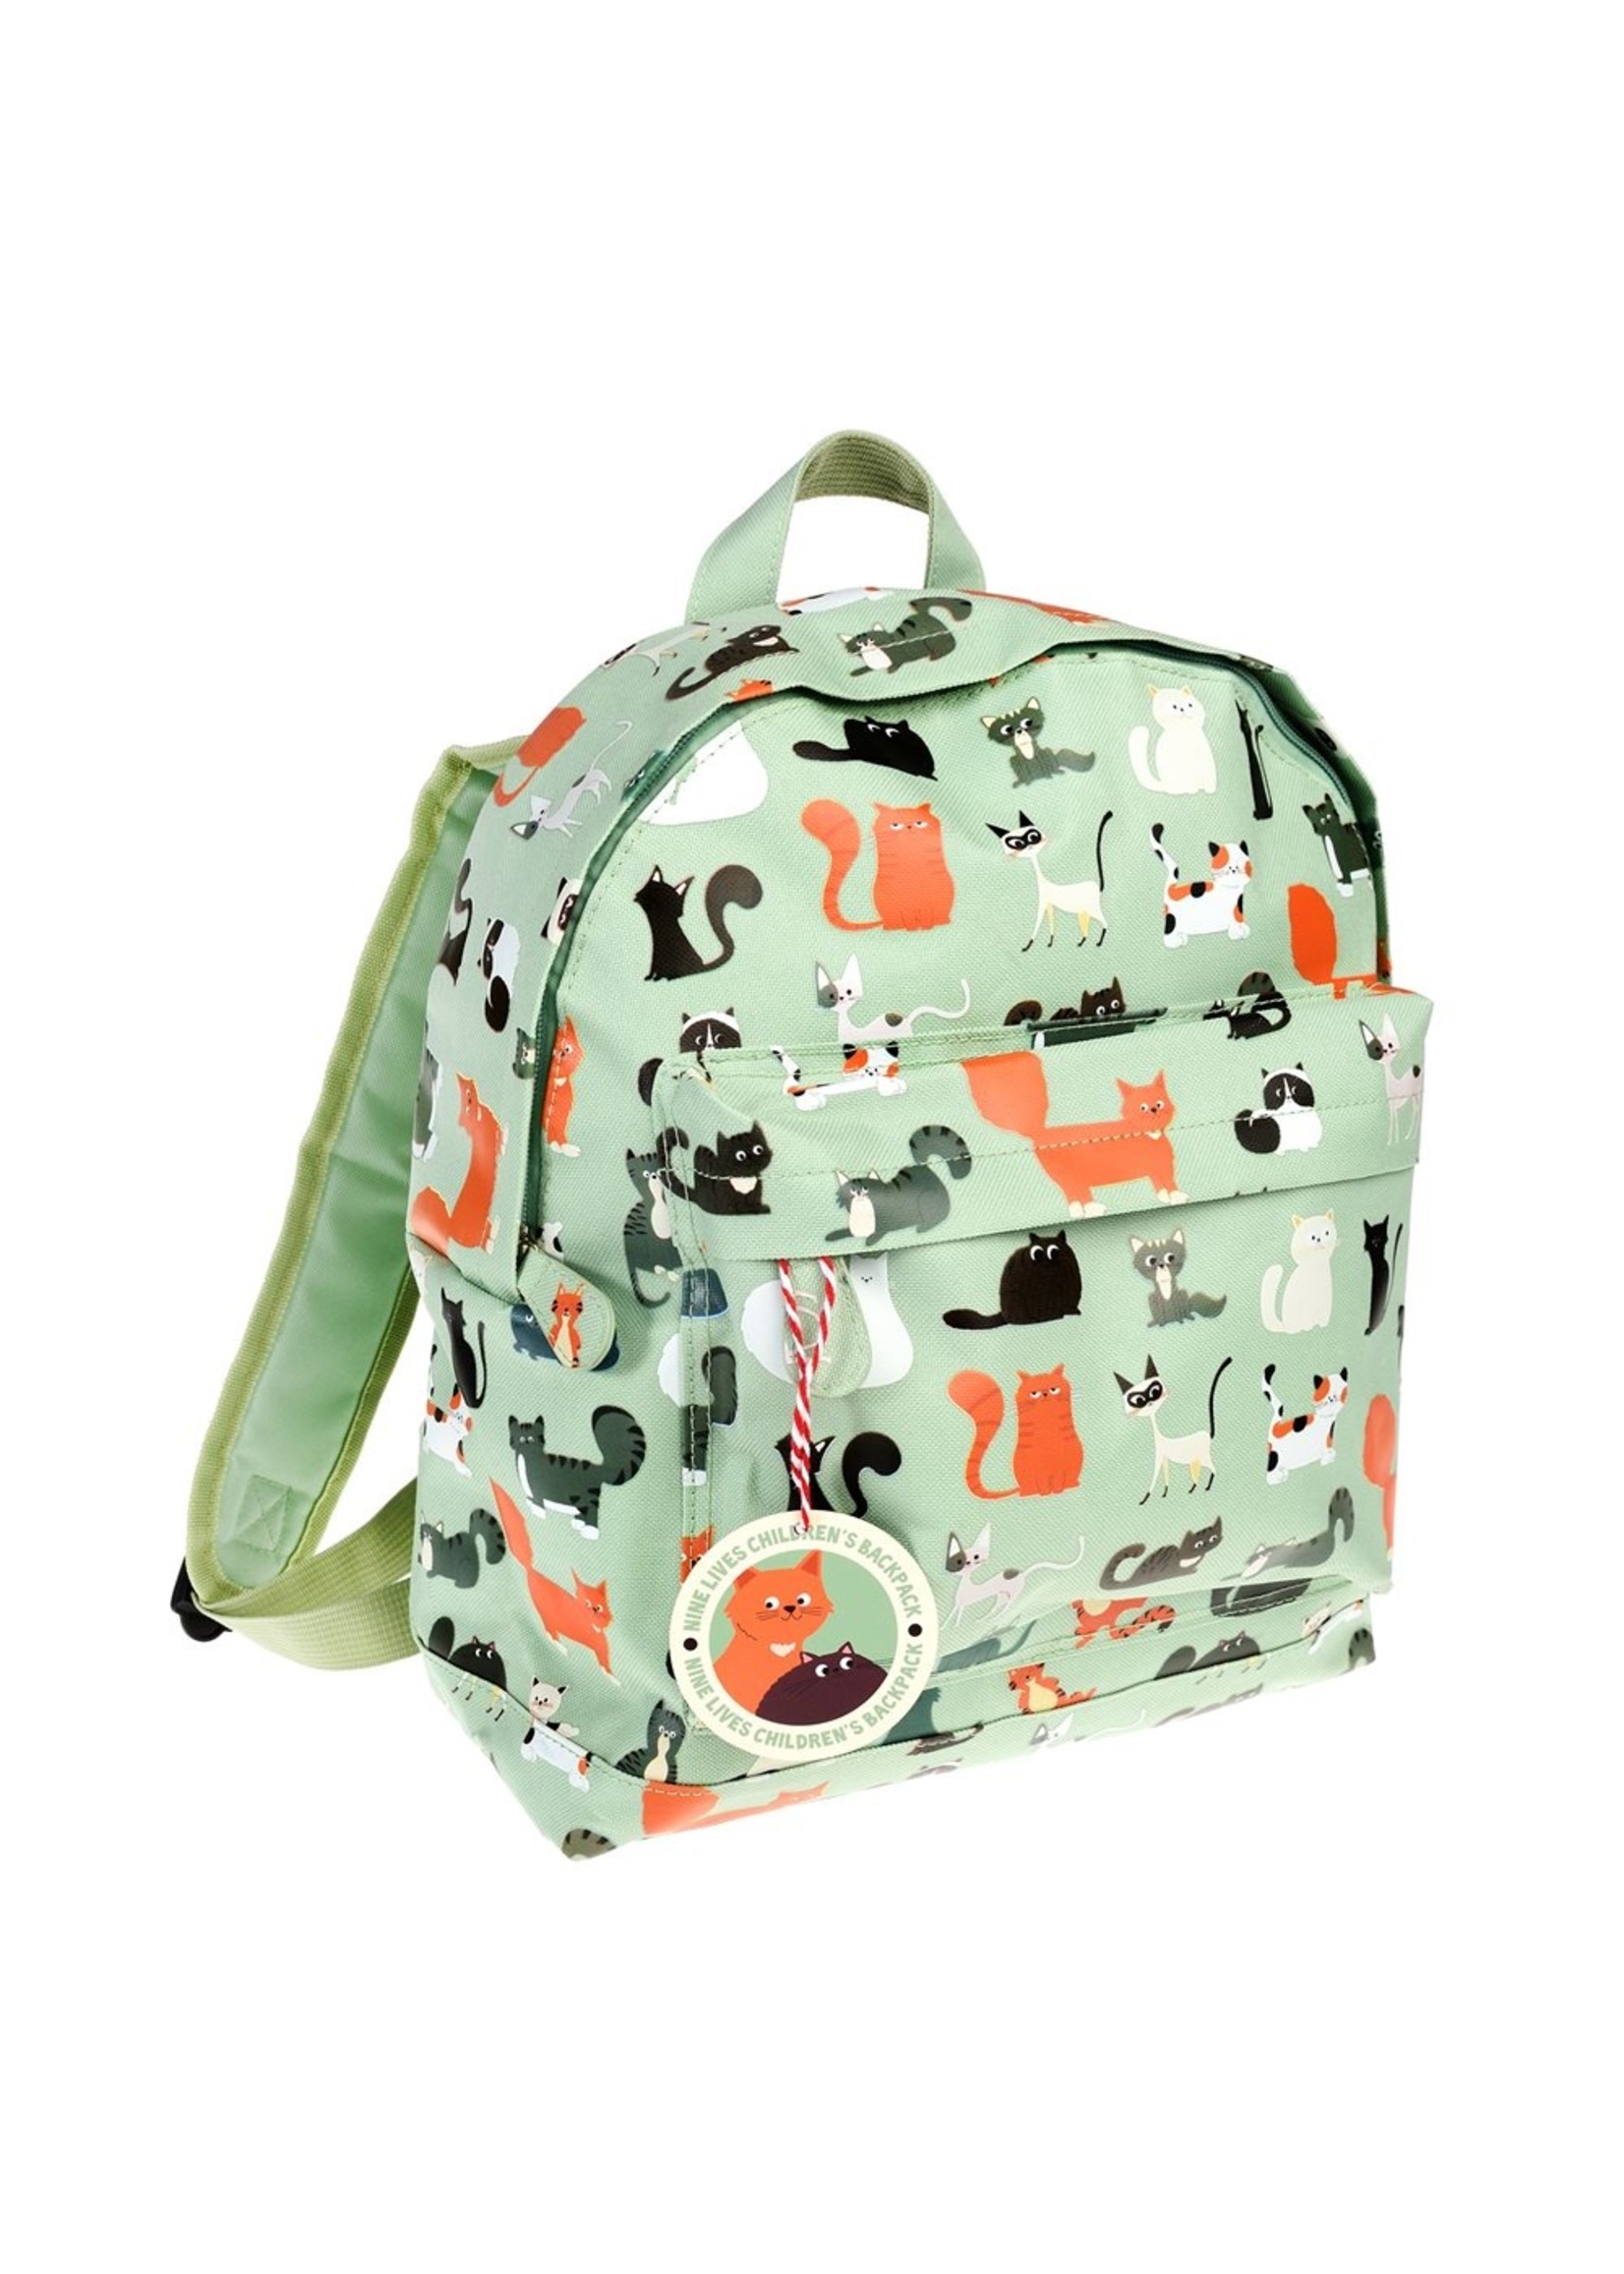 Rex London Children's backpack Nine Lives. Green with cats - H37cm